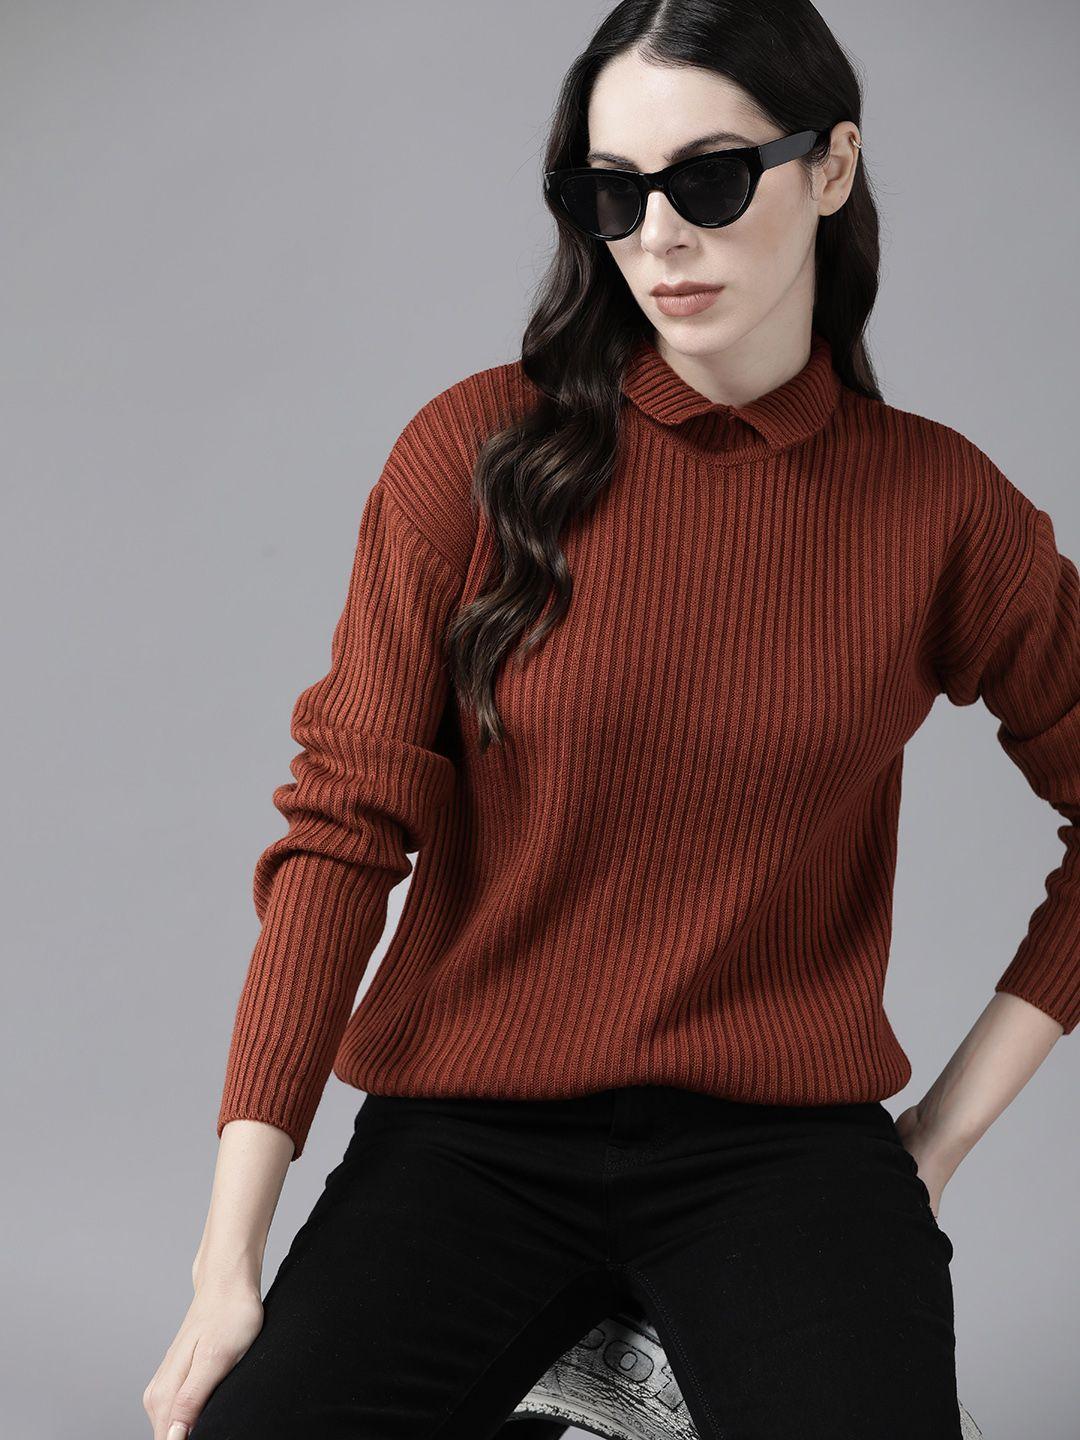 the roadster lifestyle co. ribbed turtle neck pullover